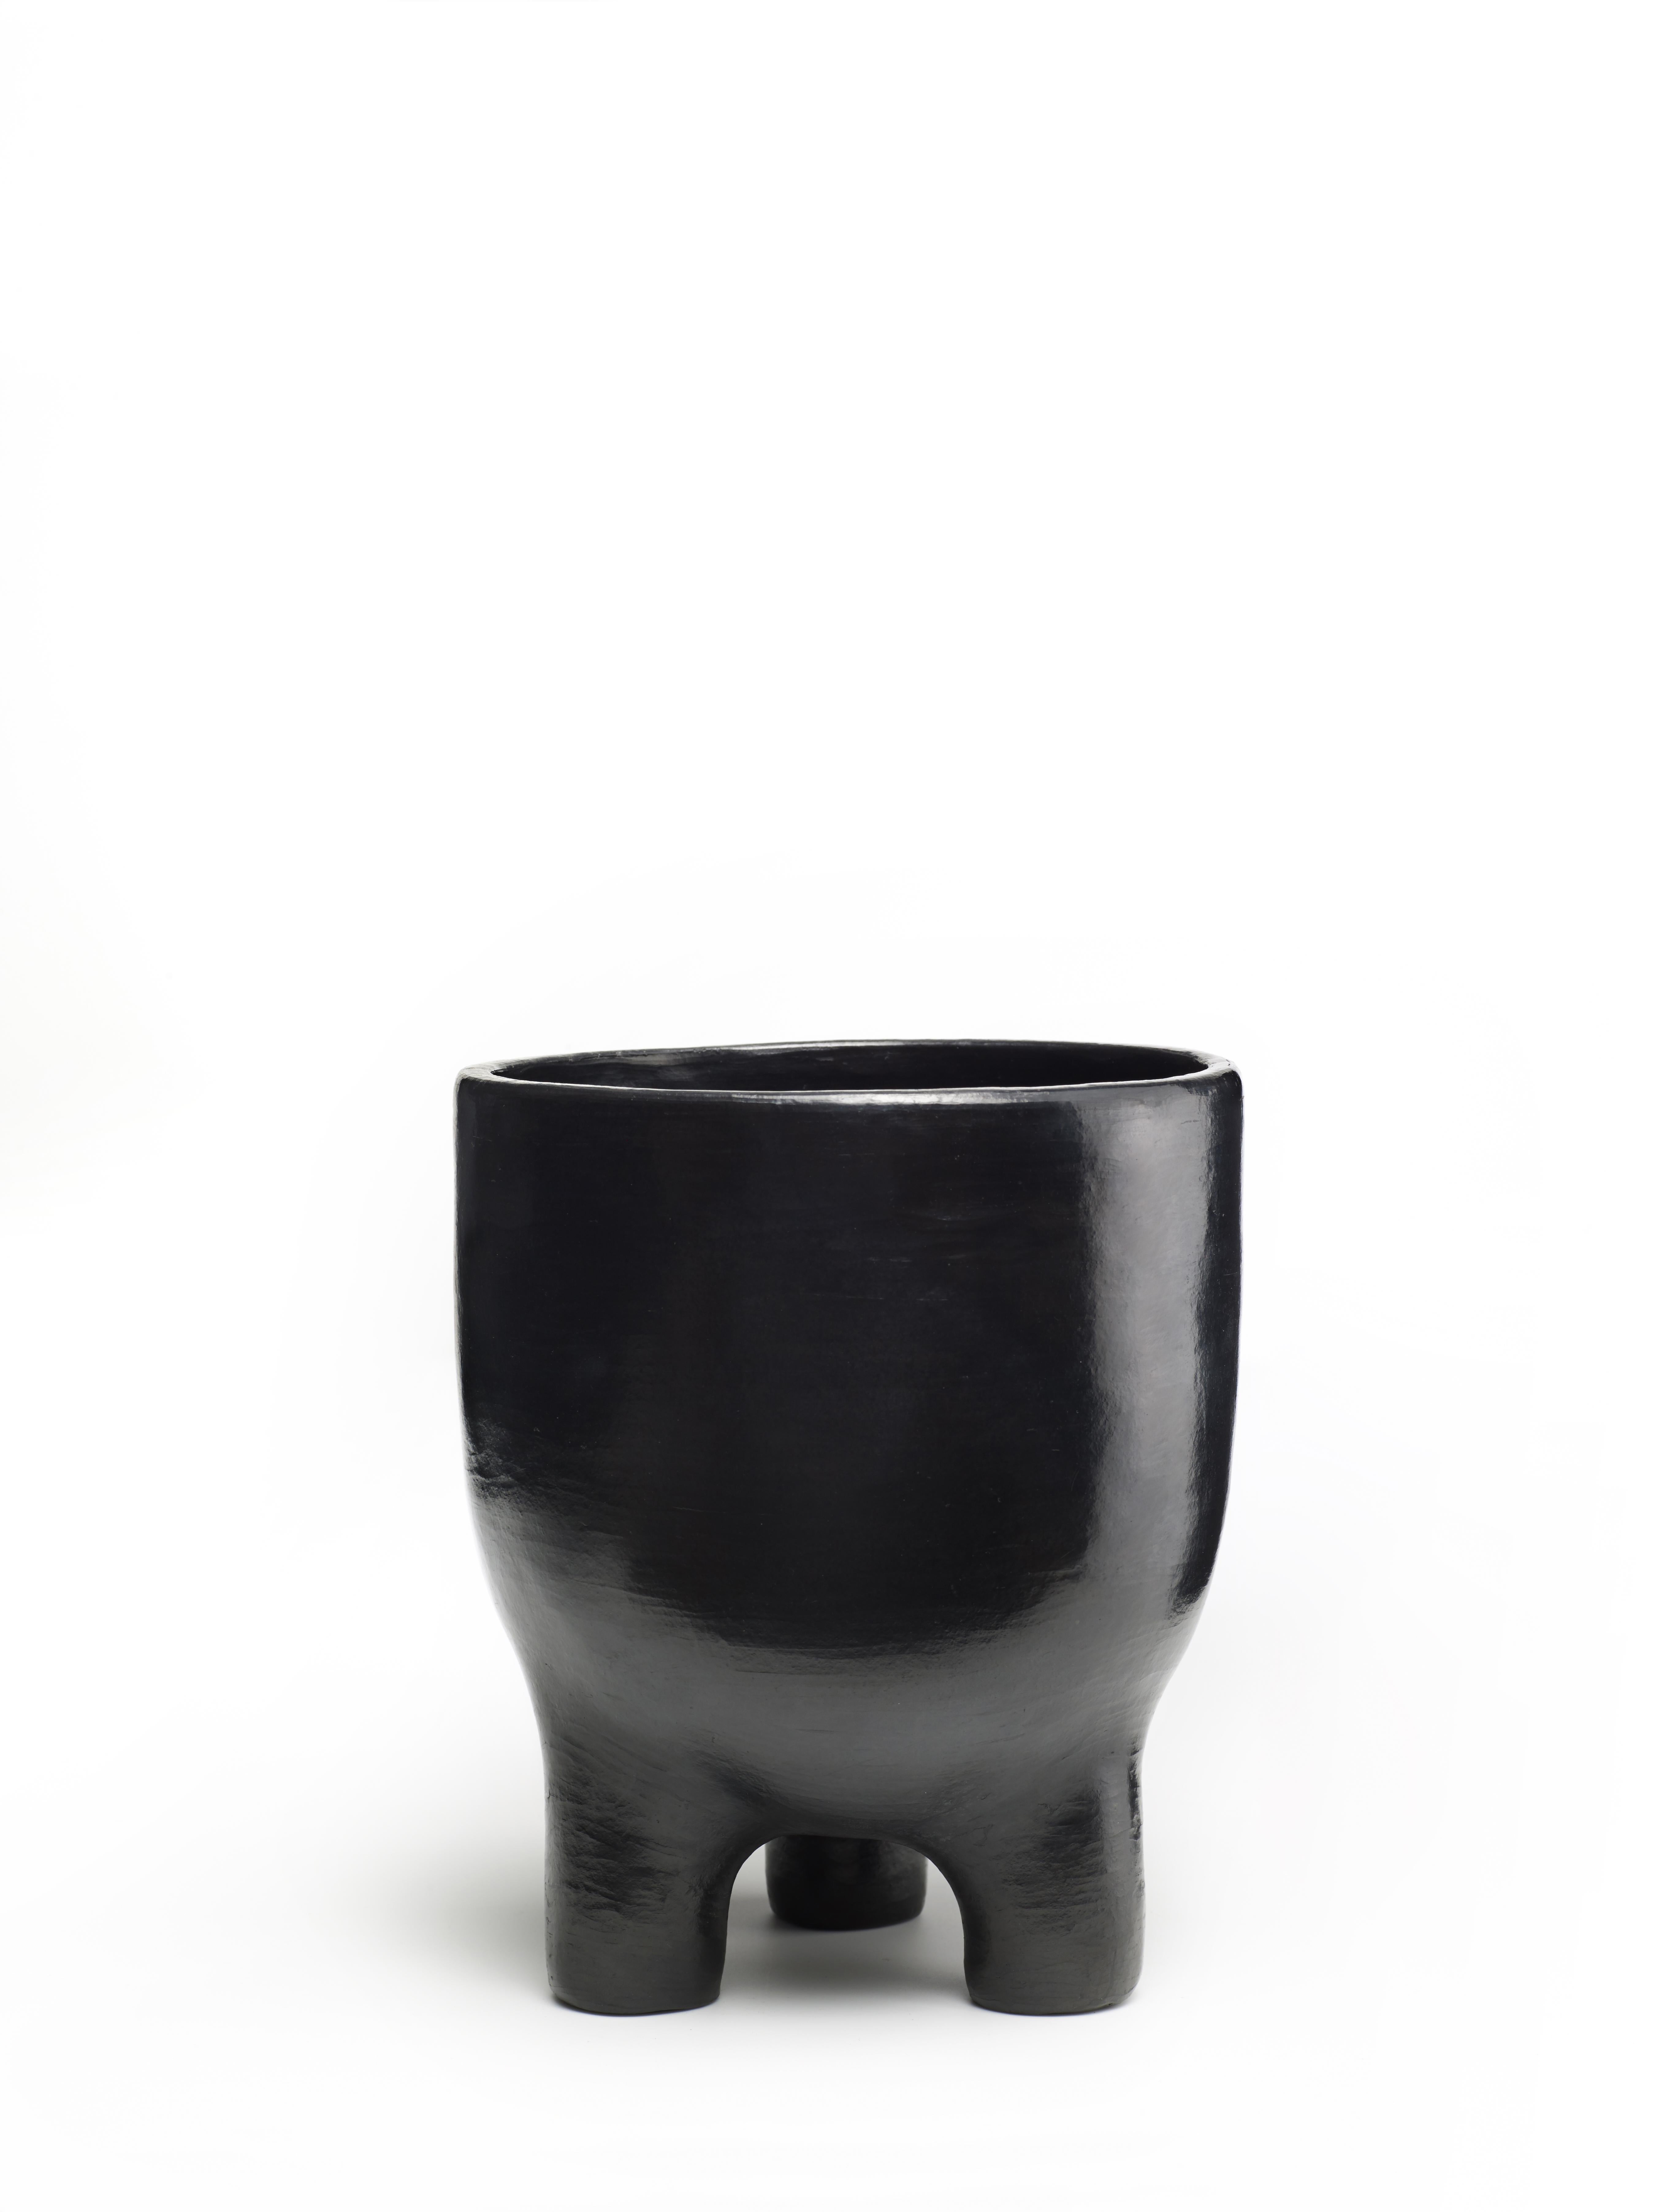 Mini Pot 2 by Sebastian Herkner
Materials: Heat-resistant black ceramic. 
Technique: Glazed. Oven cooked and polished with semi-precious stones. 
Dimensions: Diameter 17 cm x H 20 cm 
Available in sizes Large and Small. 

This pot belongs to